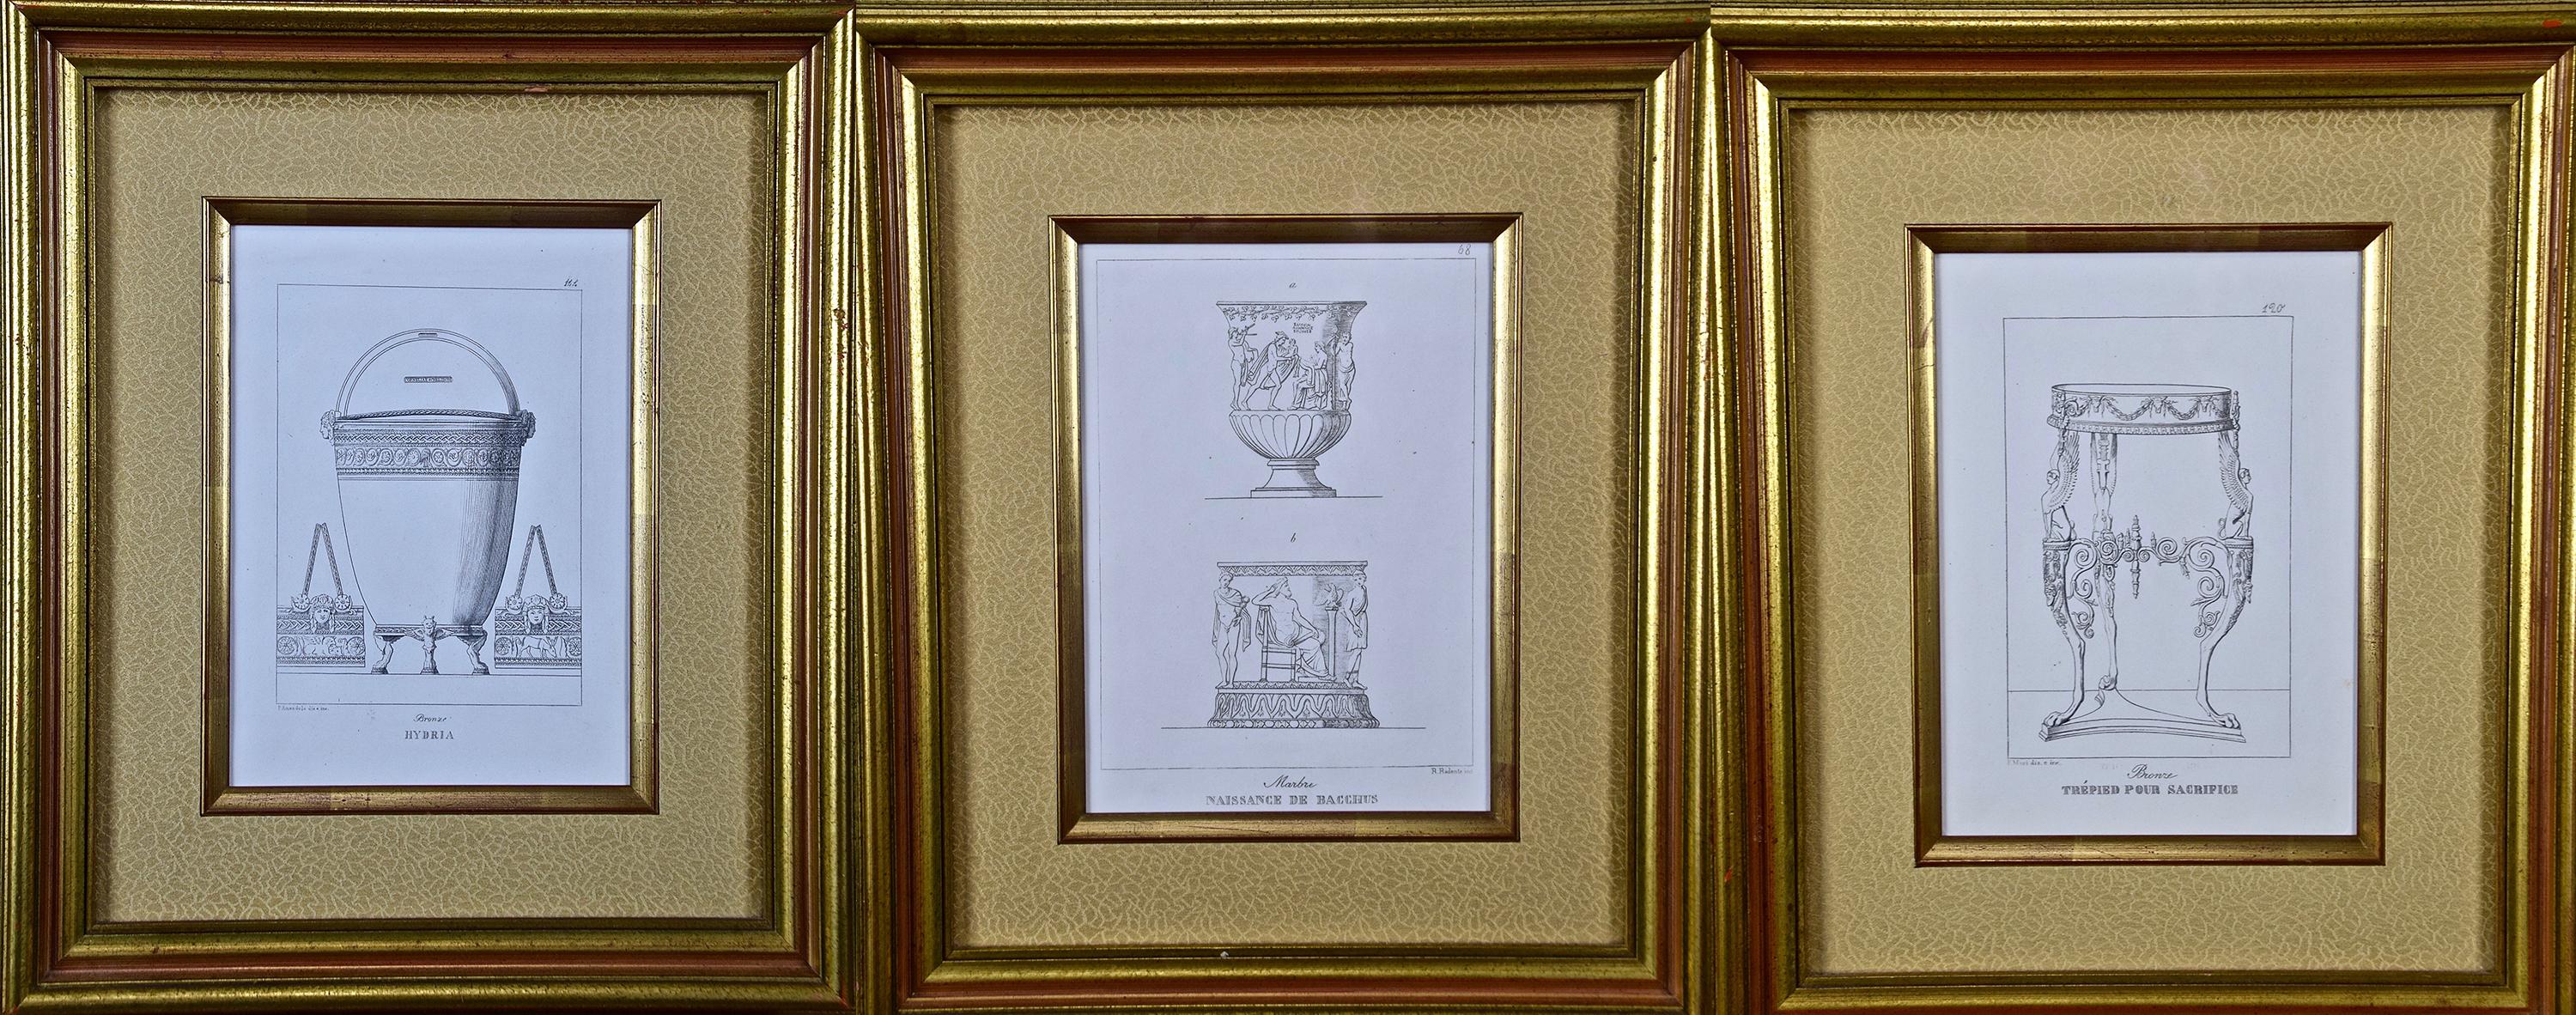 Unknown Interior Print - Three 19th C. Engravings of Classical Italian Bronze Architectural Elements